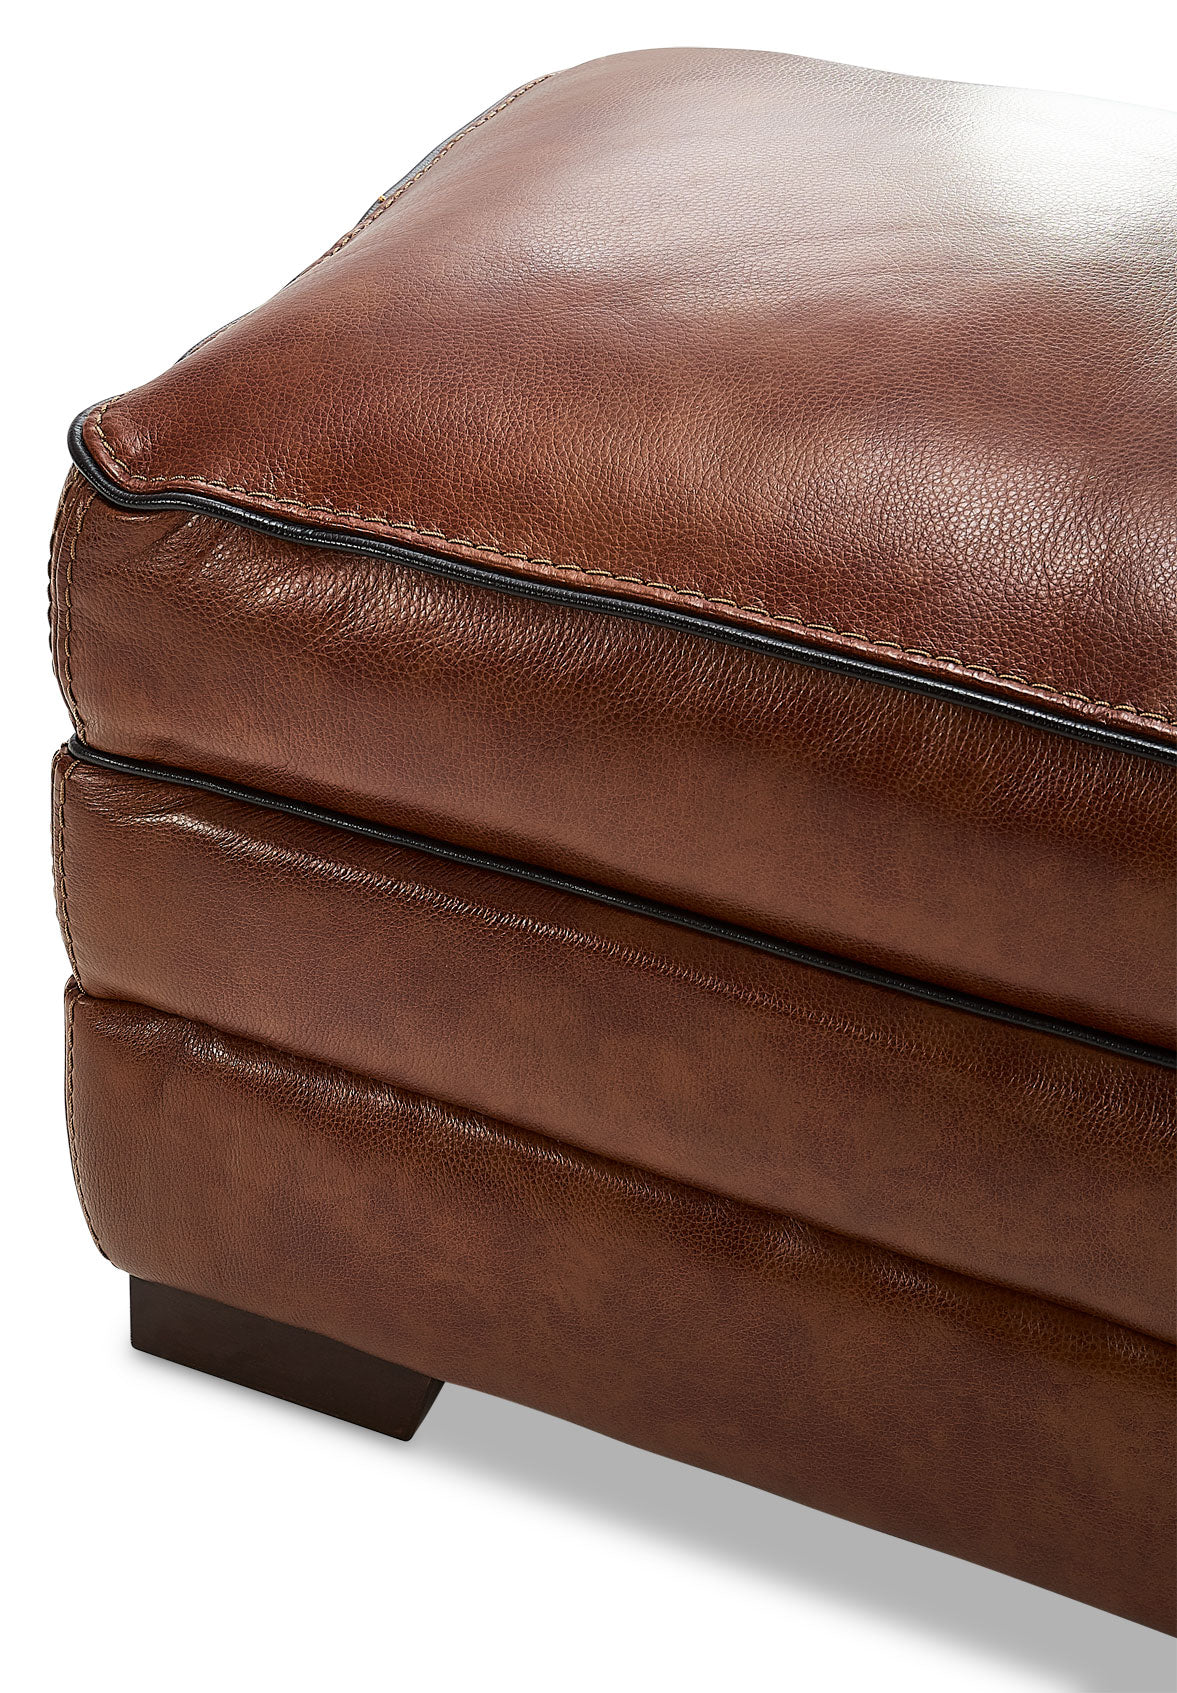 Stampede Leather Ottoman - Cognac